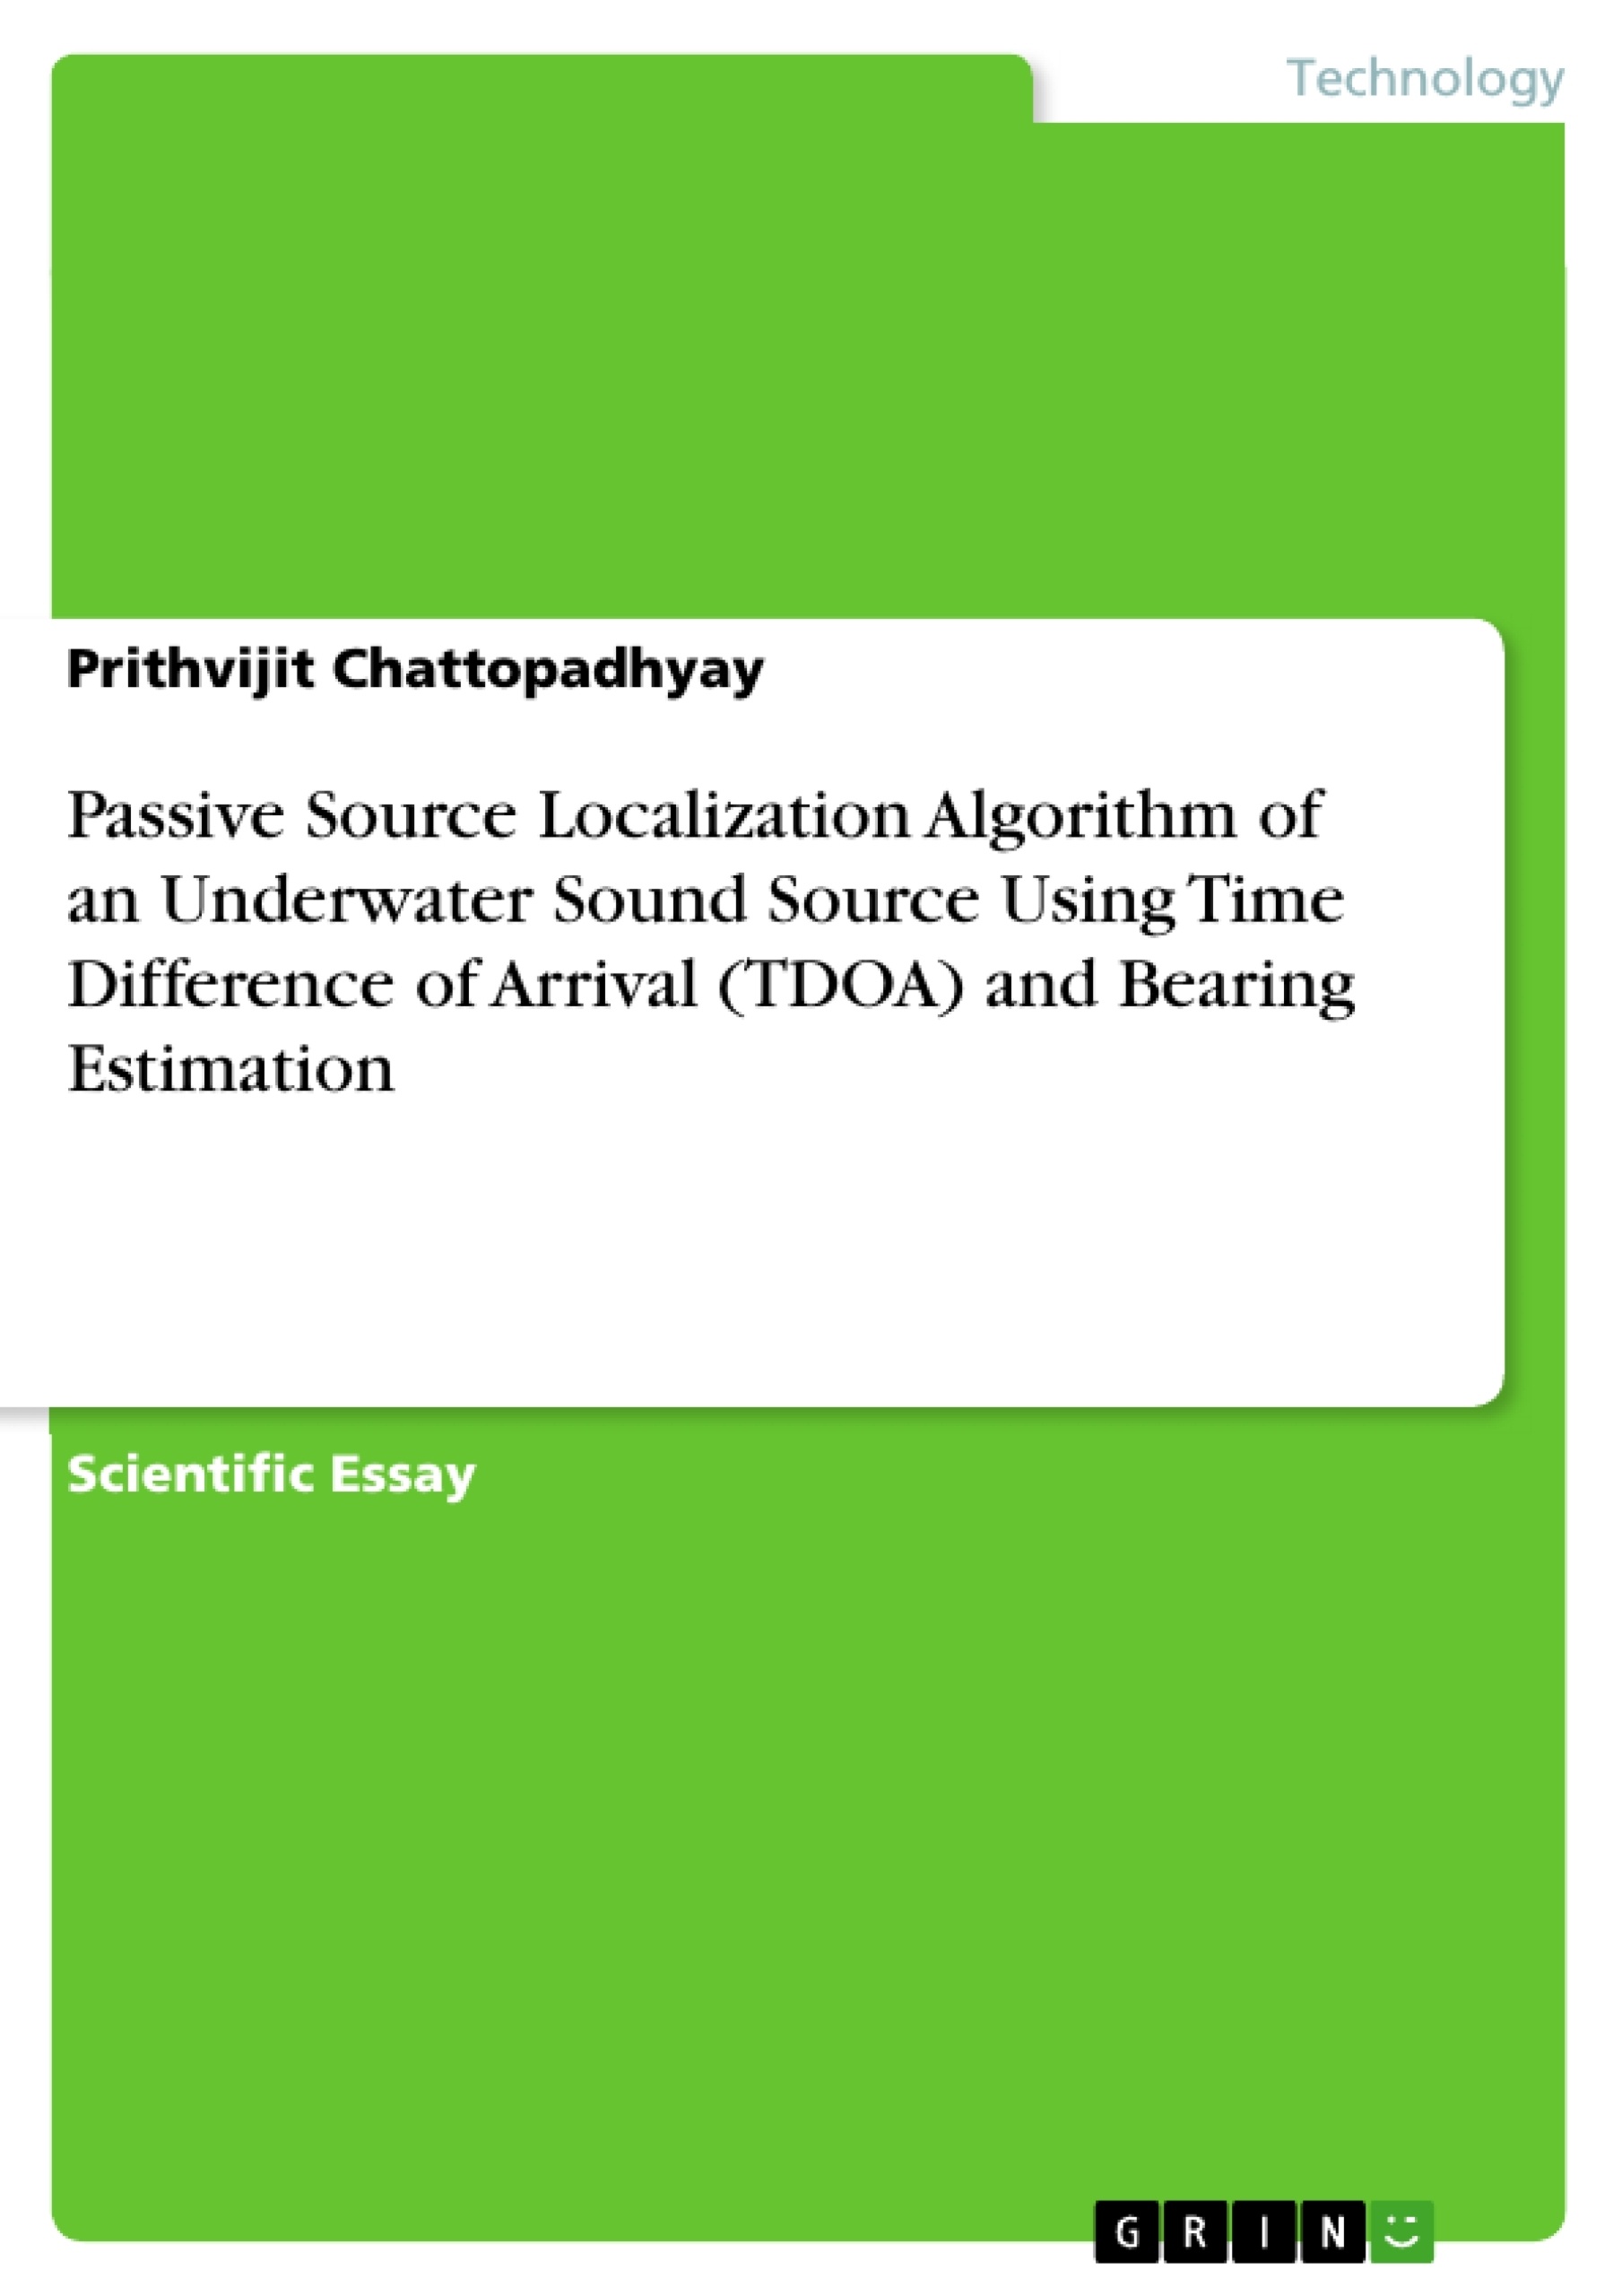 Título: Passive Source Localization Algorithm of an Underwater Sound Source Using Time Difference of Arrival (TDOA) and Bearing Estimation